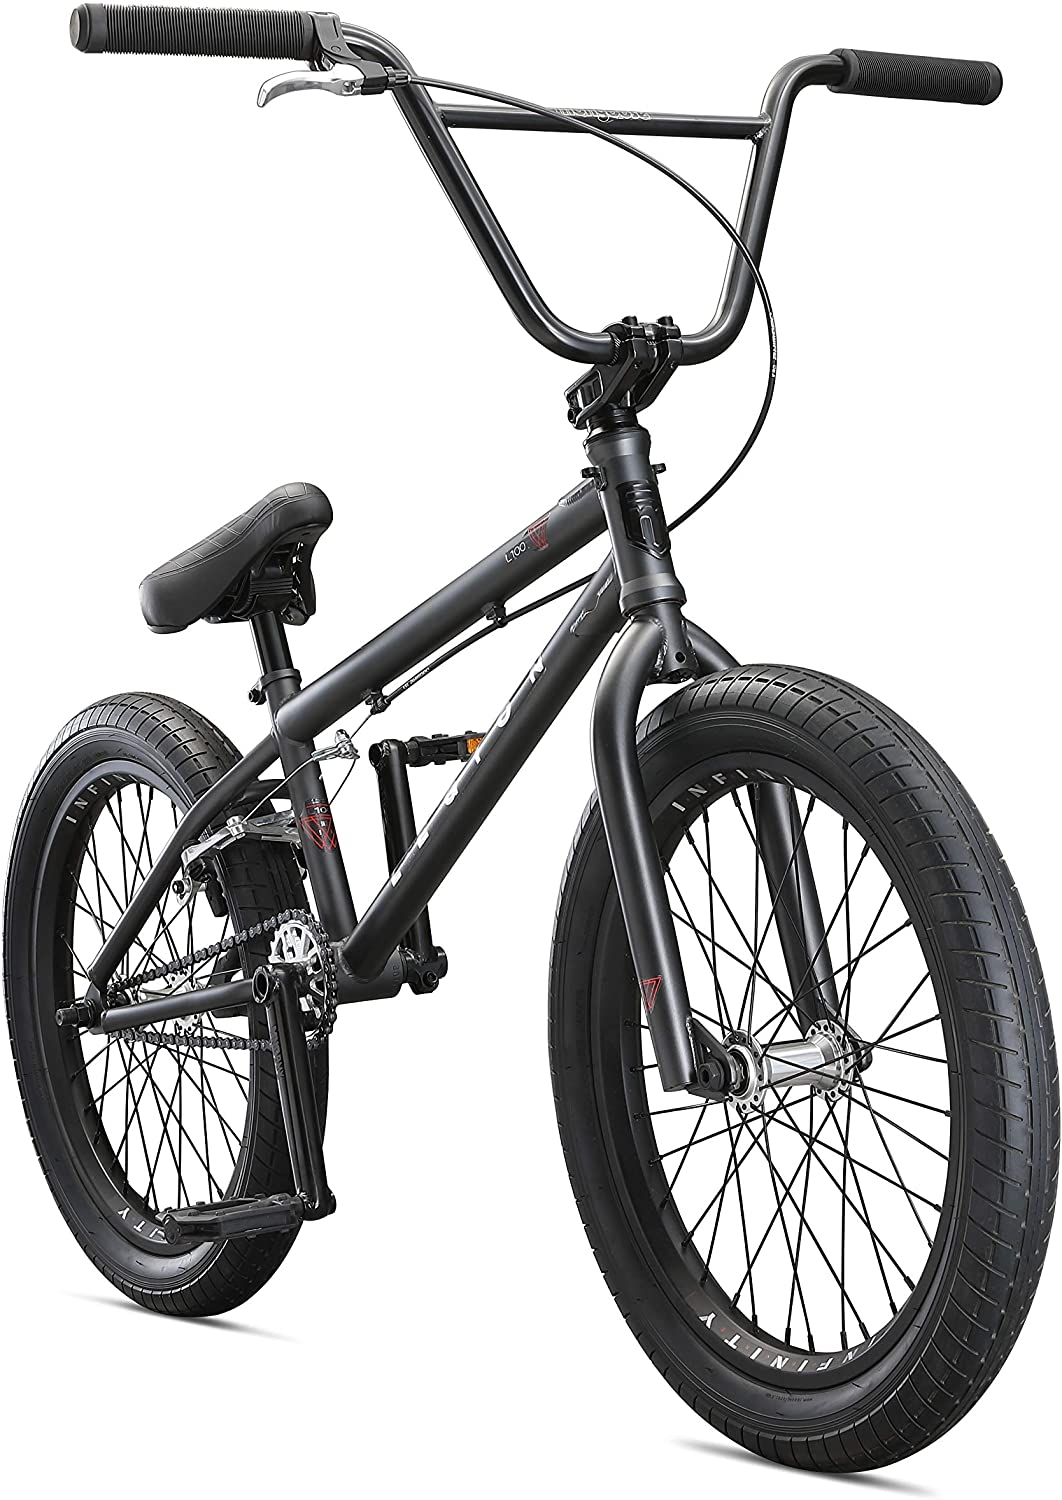 Roll-over-image-to-zoom-in-Mongoose-Legion-Freestyle-BMX-Bike-Line-for-Beginner-Level-to-Advanced-Riders-Steel-Frame-16-20-Inch-Wheels